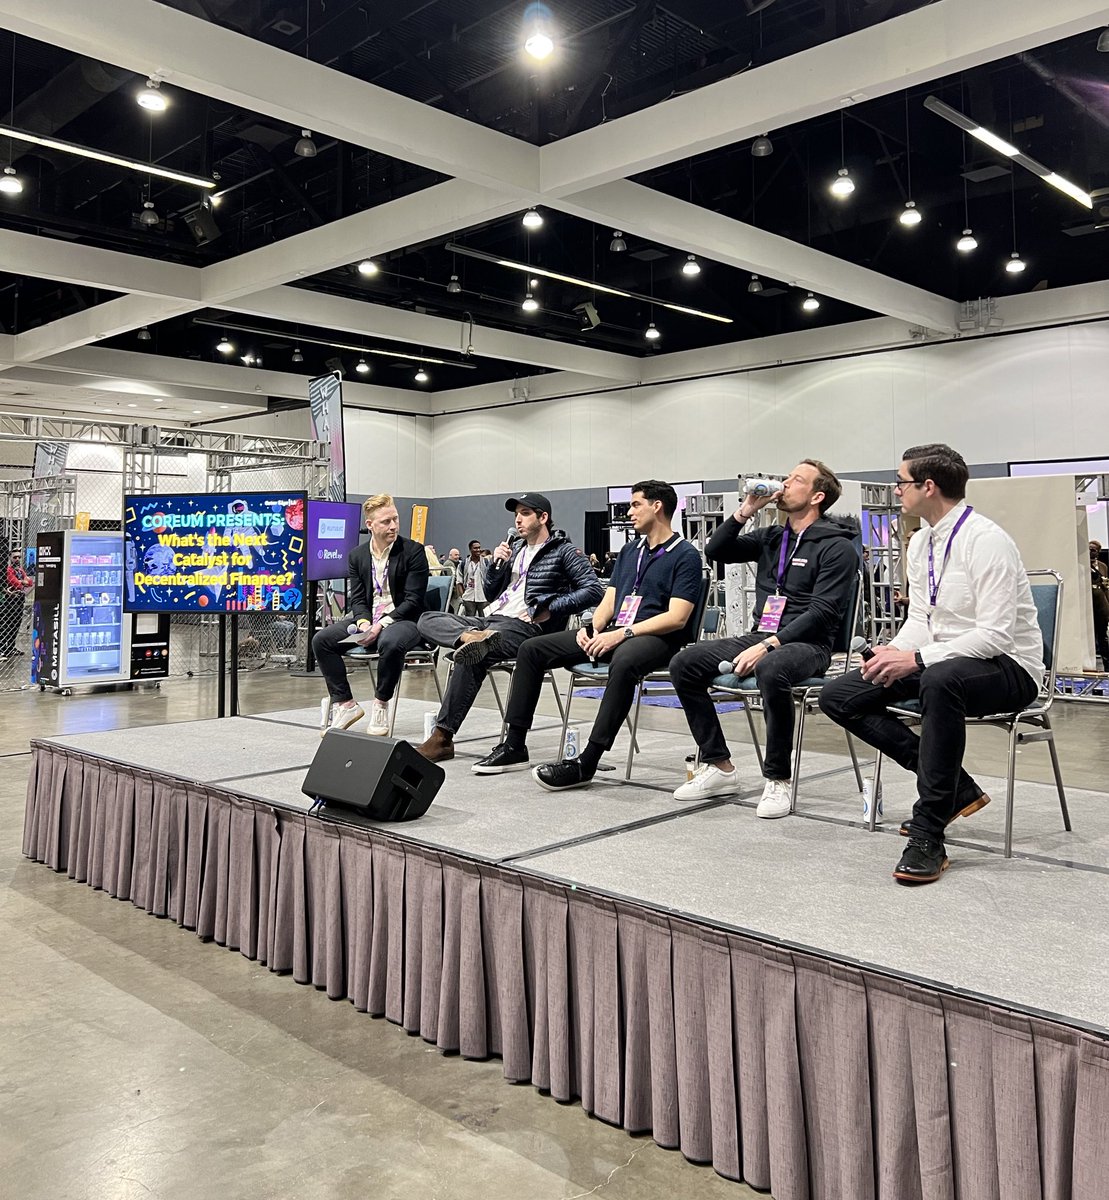 Thank you @NFTLAlive for allowing us to sponsor the event!

Grateful for the opportunity to connect and build relationships with web 3 leaders

Panel discussion recording posted here when received from Outeredge

#NFTLA #DeFi $HIFI